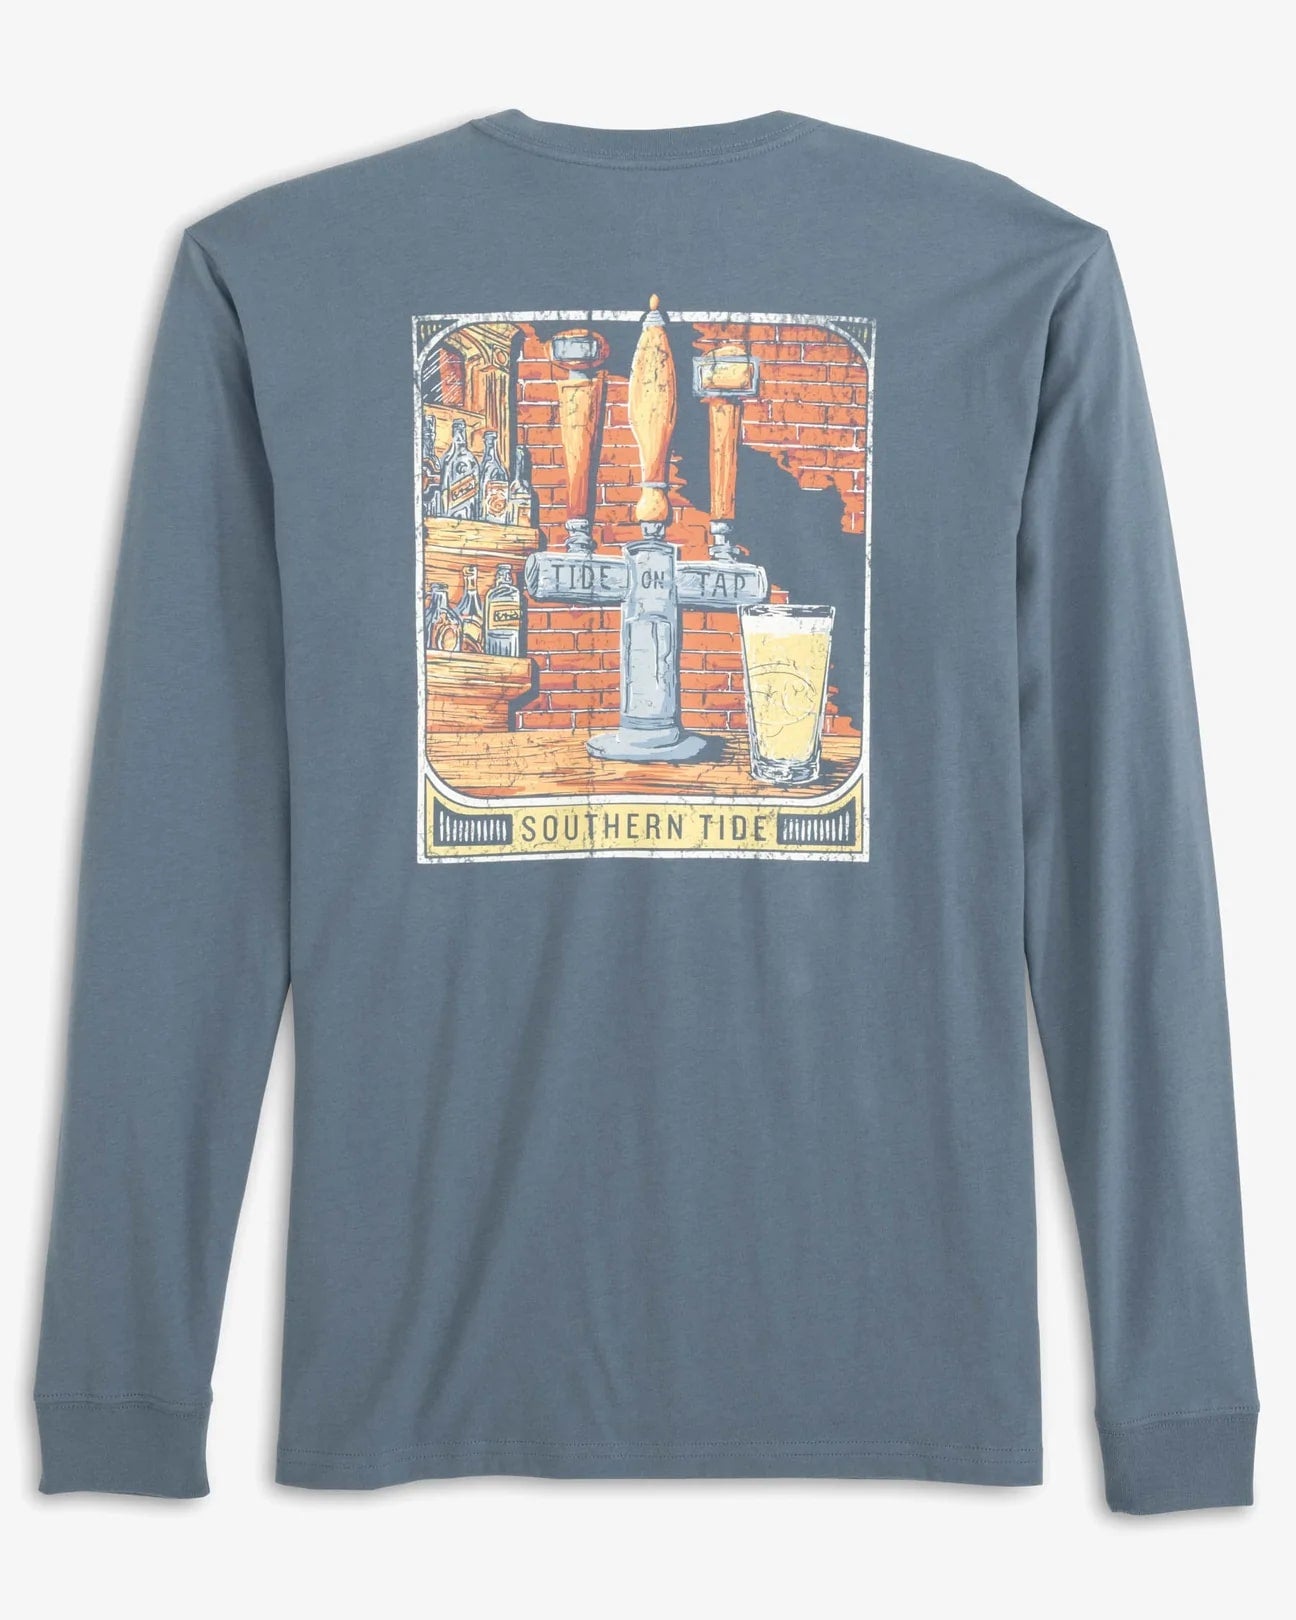 The back view of the Tide on Tap Long Sleeve T-Shirt by Southern Tide - Blue Haze